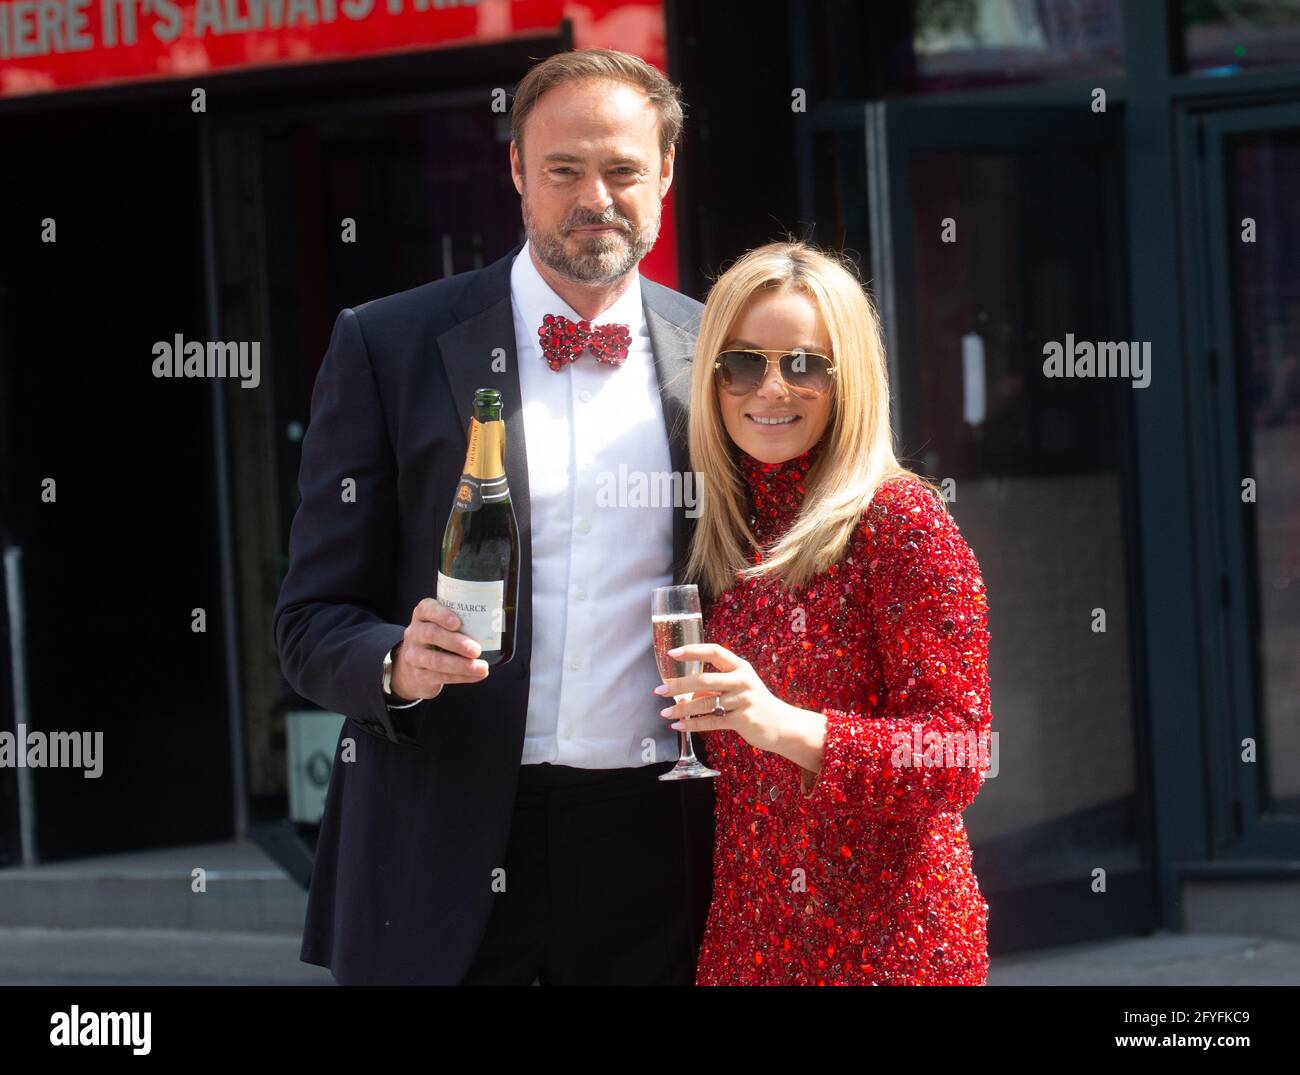 London, UK. 28th May, 2021. Amanda Holden leaves the offices of Global Radio and celebrates with Jamie Theakston after there was one lucky winner of One Million Pounds on their Miliion Pound quiz, 'Make me a Millionaire'. Shelley Humphries was the lucky winner. Credit: Mark Thomas/Alamy Live News Stock Photo